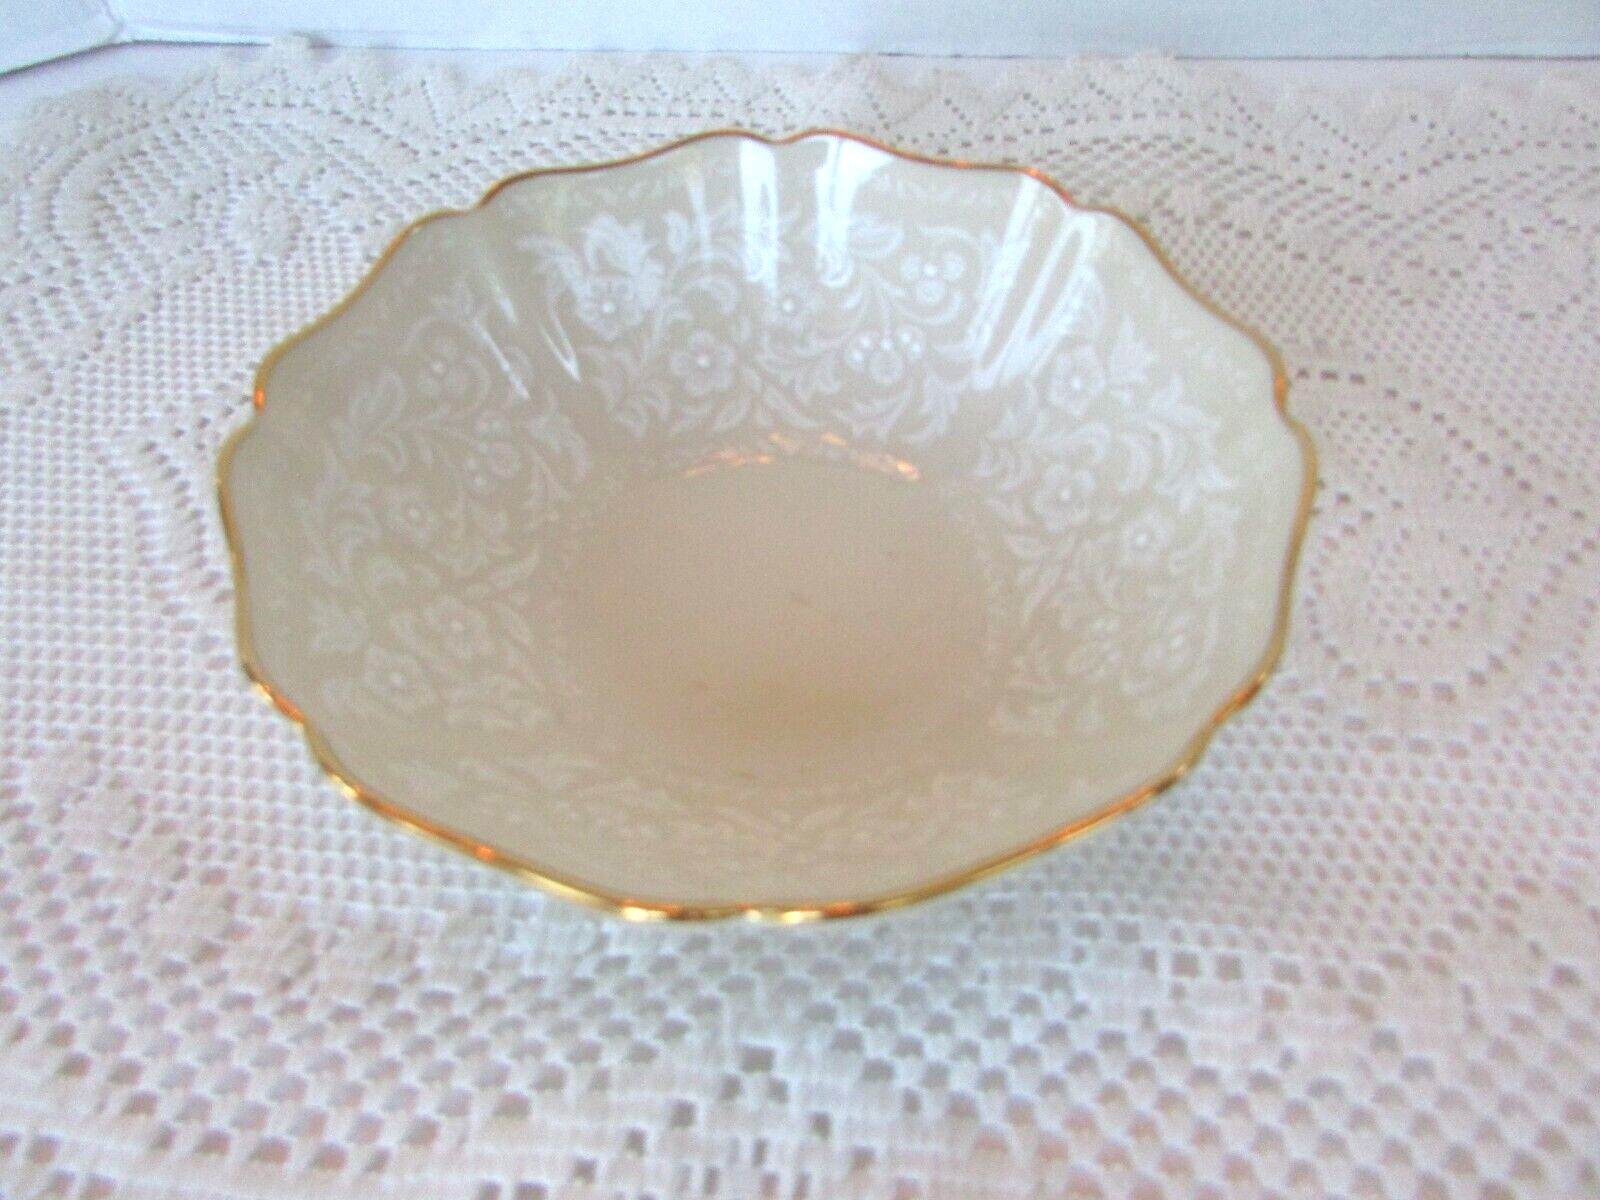 Primary image for Lenox Special 5-5/8" Round Bowl Scallop Rim White Embossed on Ivory Made in USA